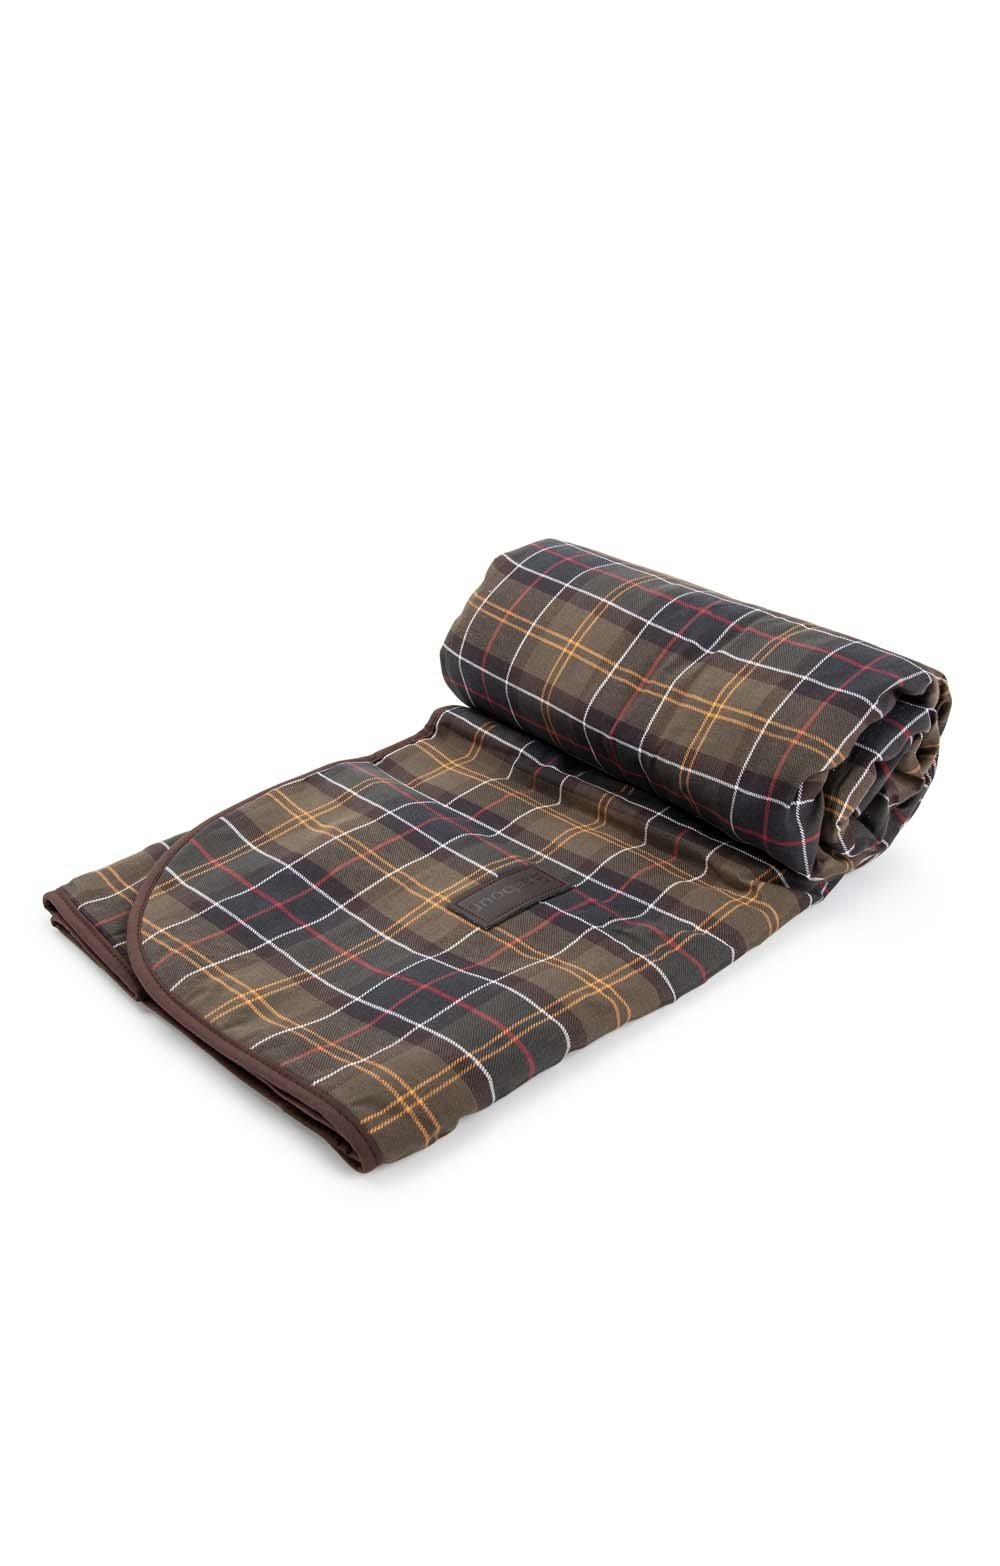 barbour dog blanket Cheaper Than Retail 